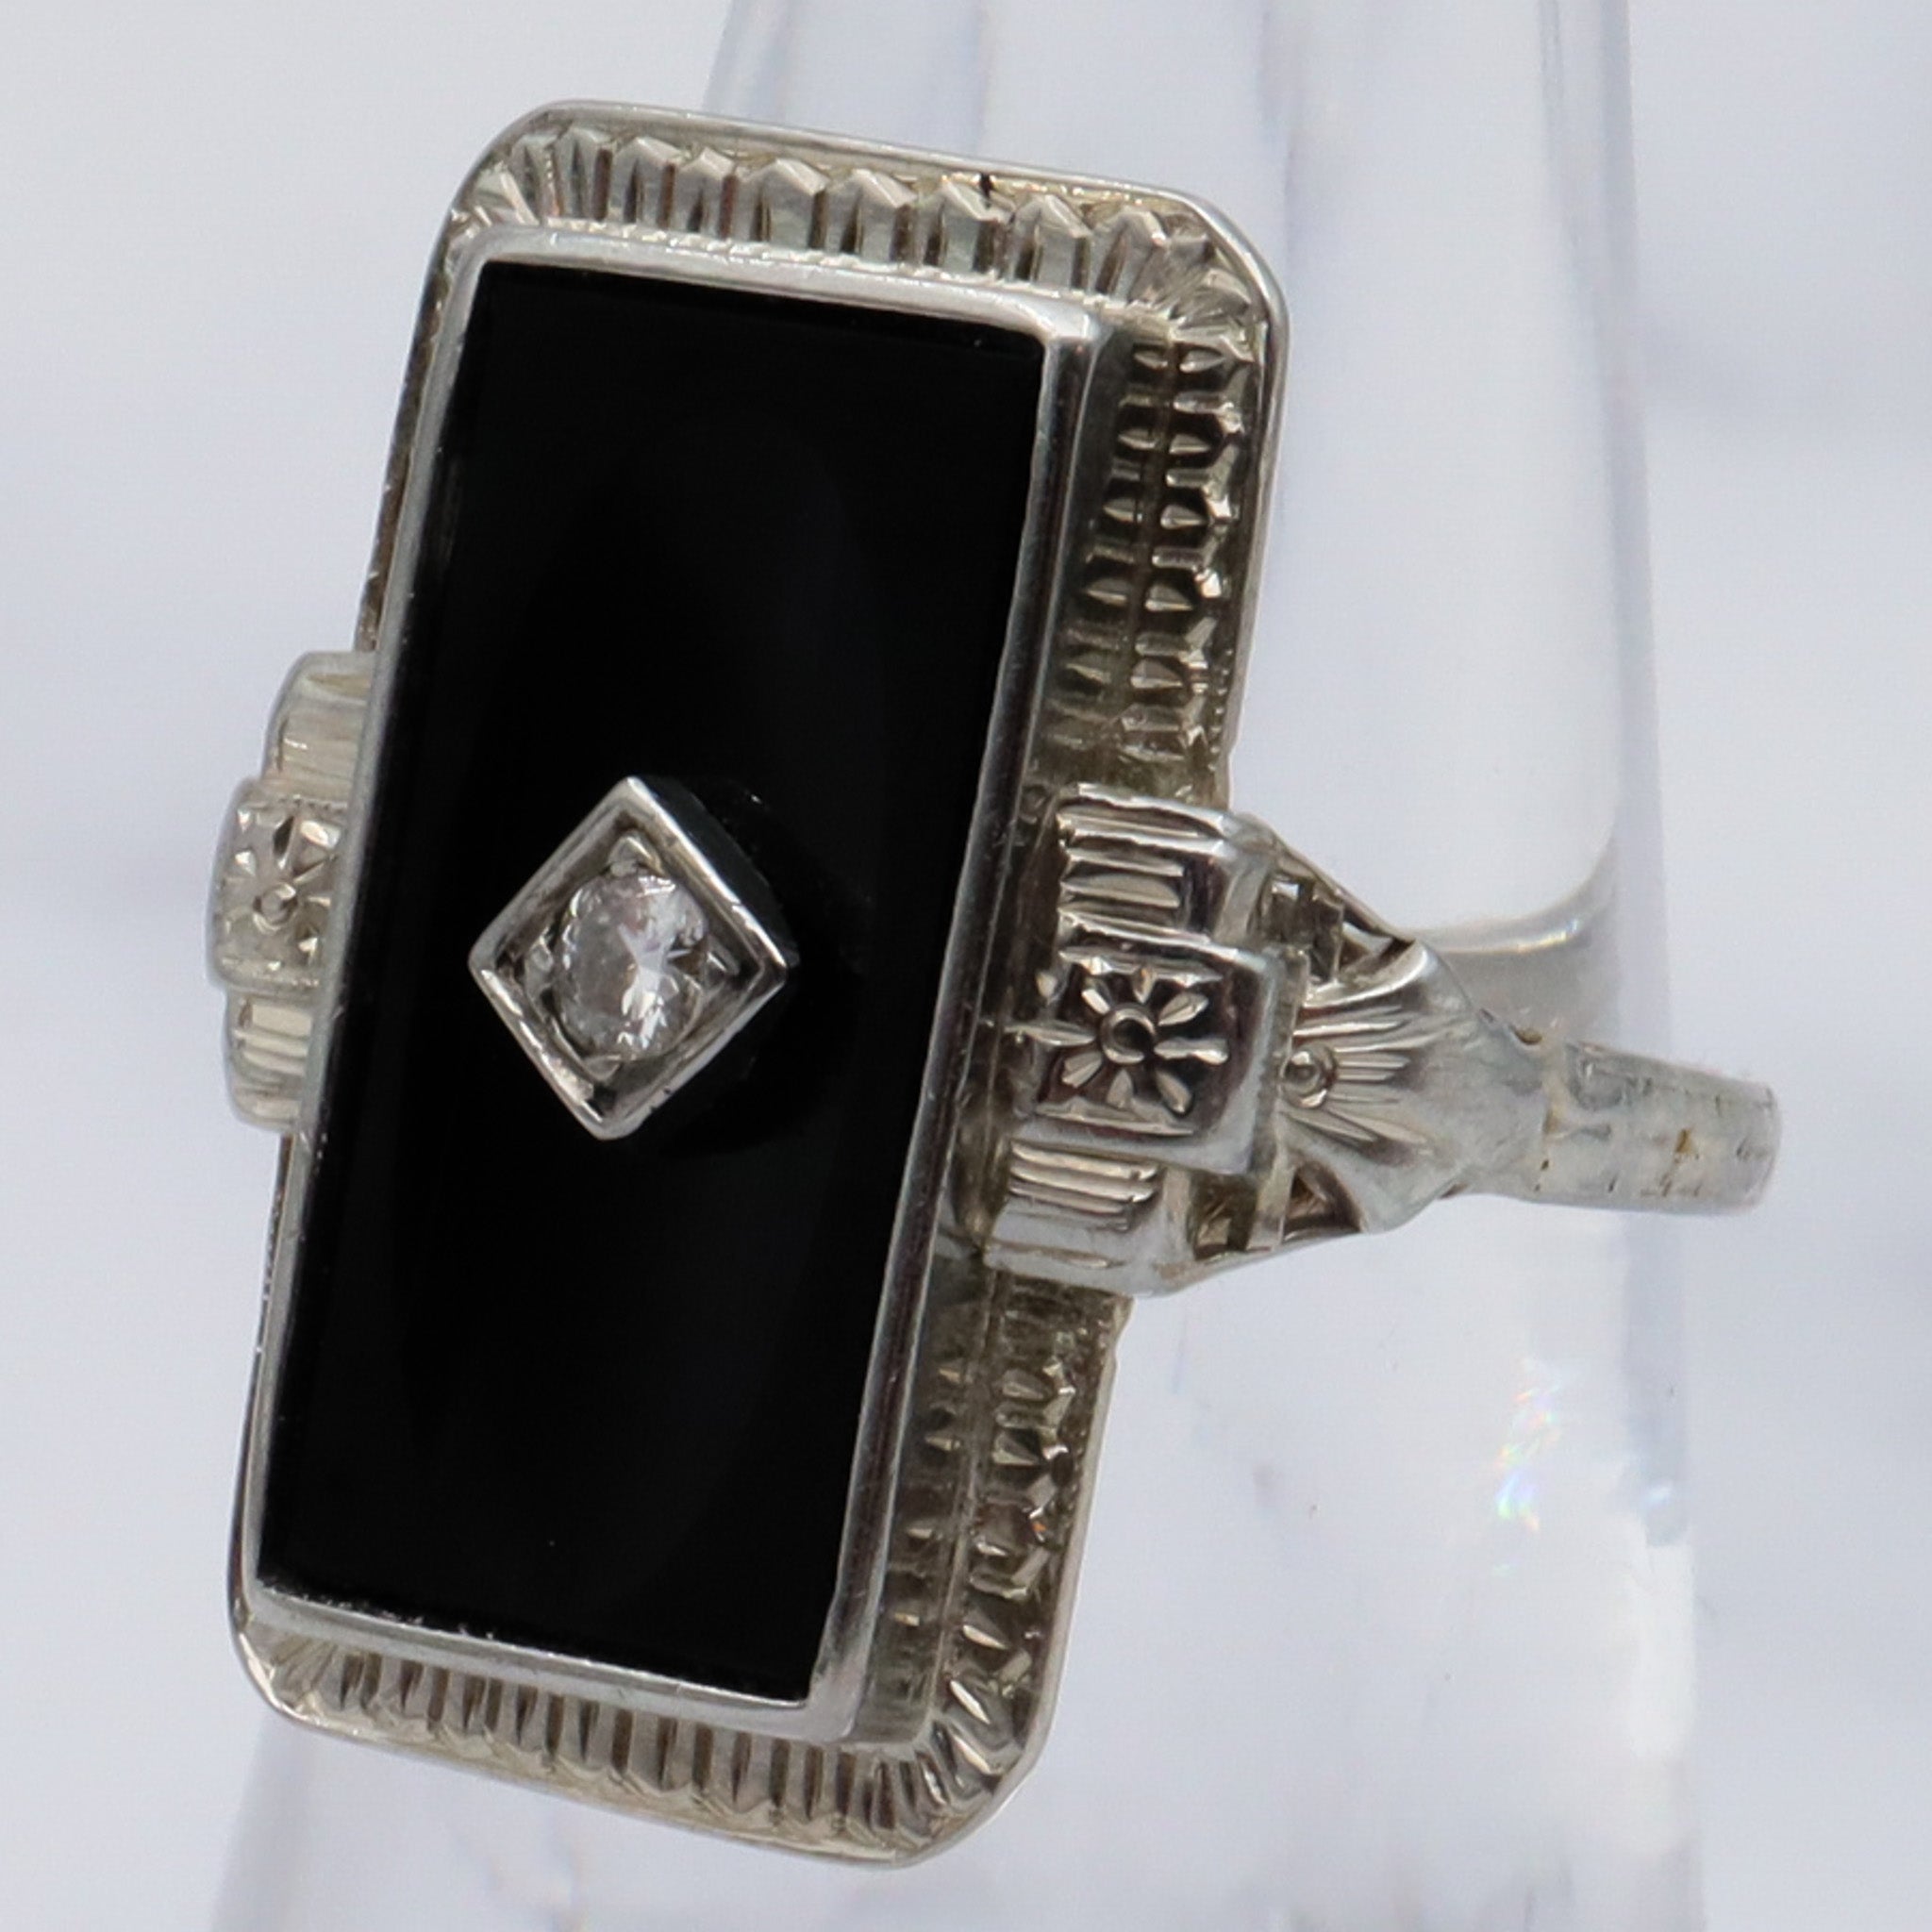 Antique Art Deco 18k white gold carved onyx signet with diamond center ring, sz 5